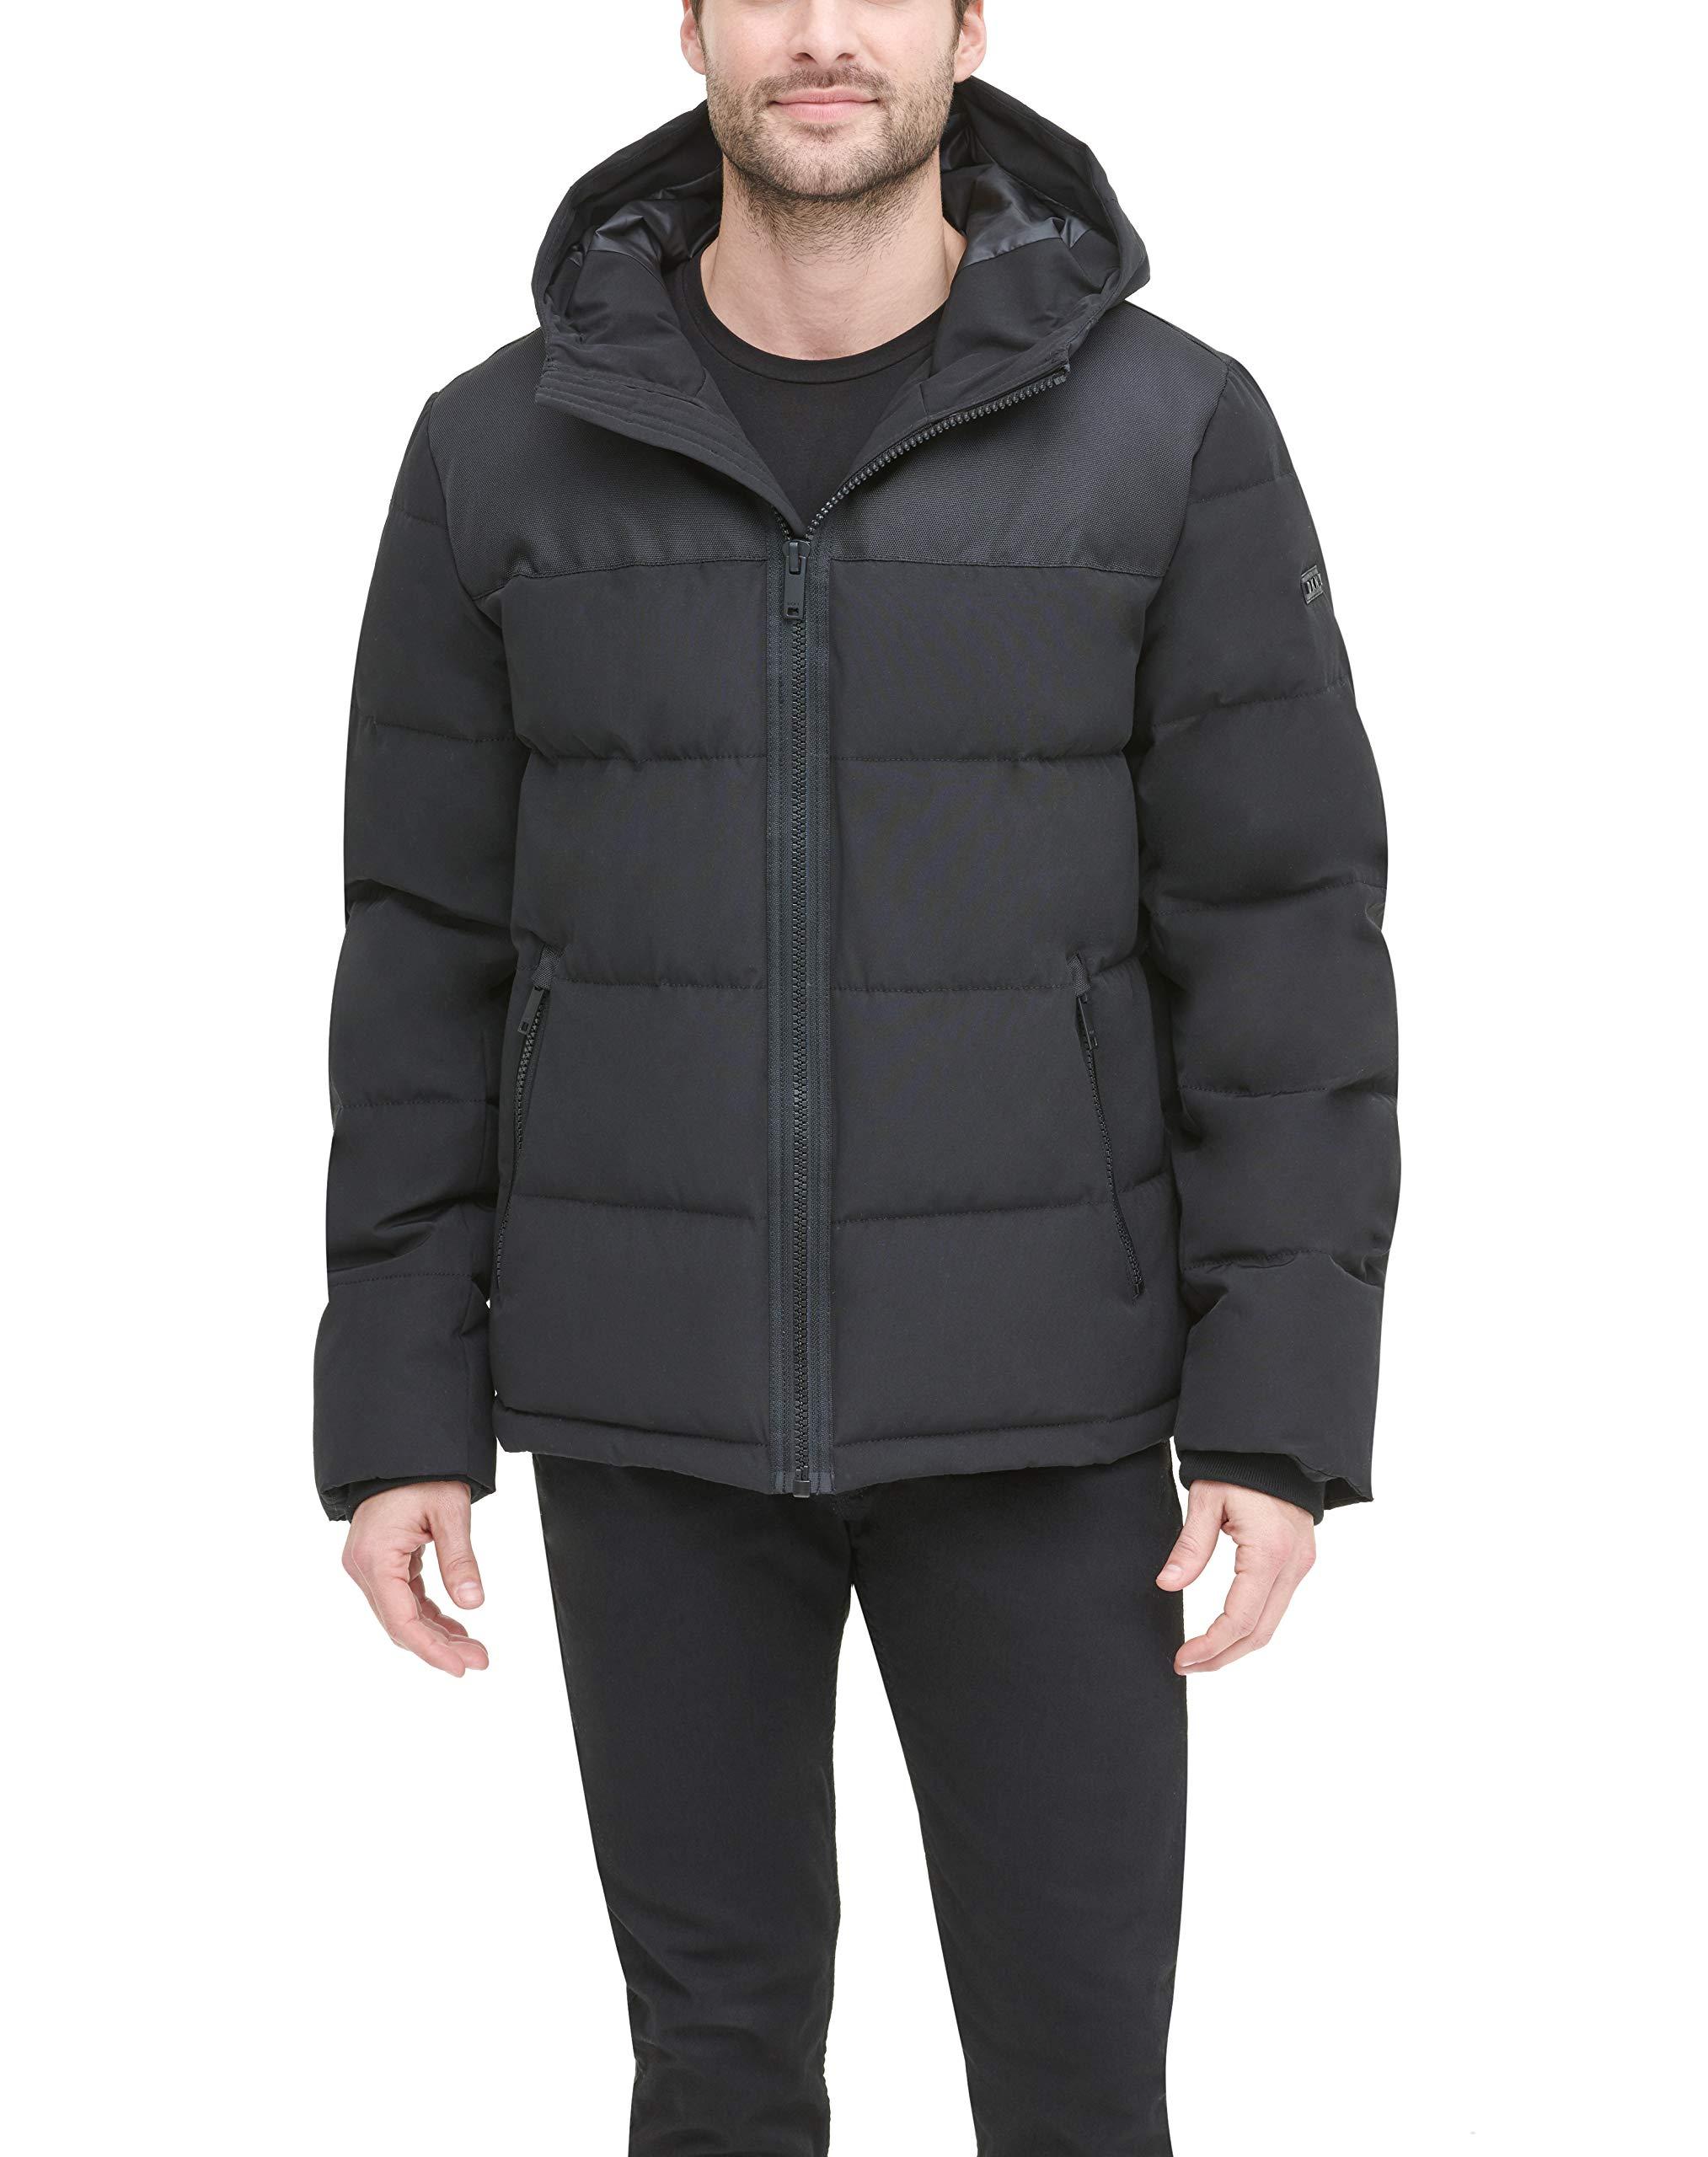 DKNY Shawn Quilted Mixed Media Hooded Puffer Jacket in Black for Men - Lyst